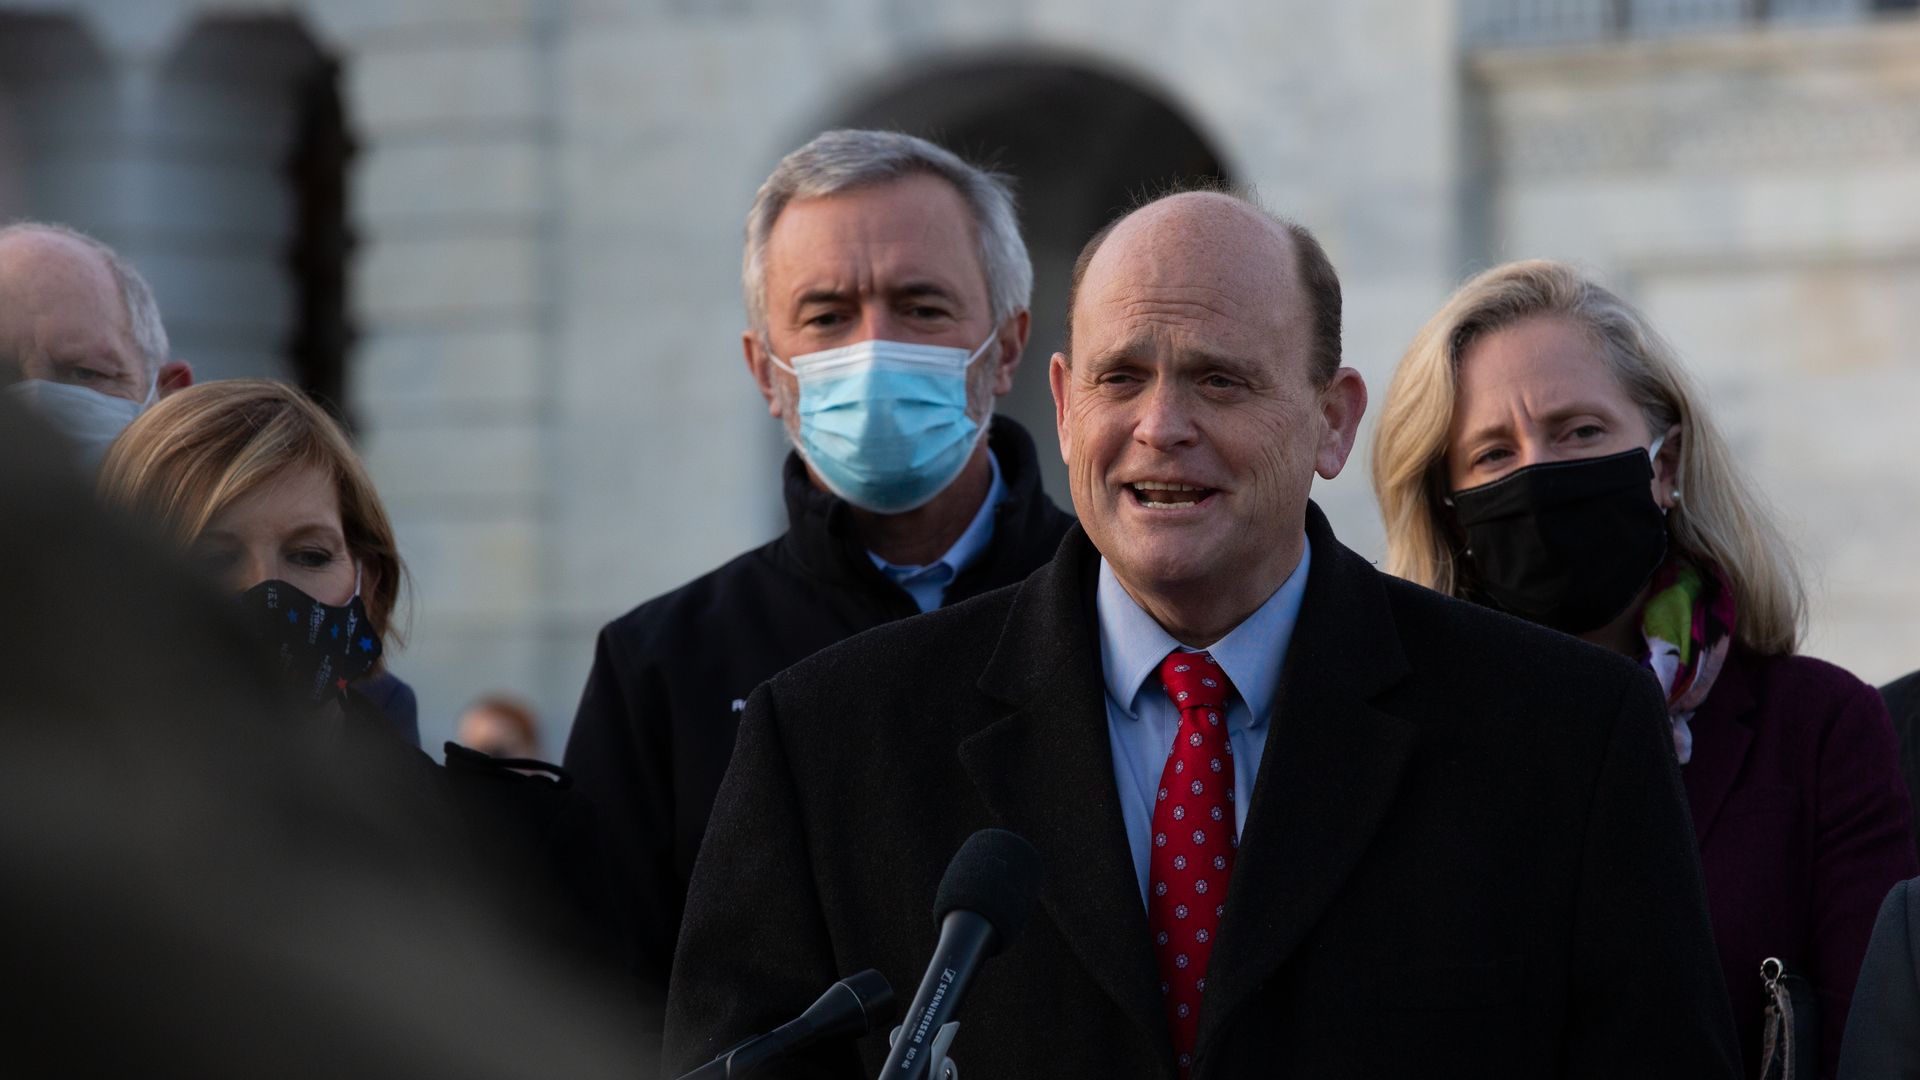 Rep. Tom Reed (R-NY) at a press conference outside the US Capitol on December 21, 2020 in Washington, DC.